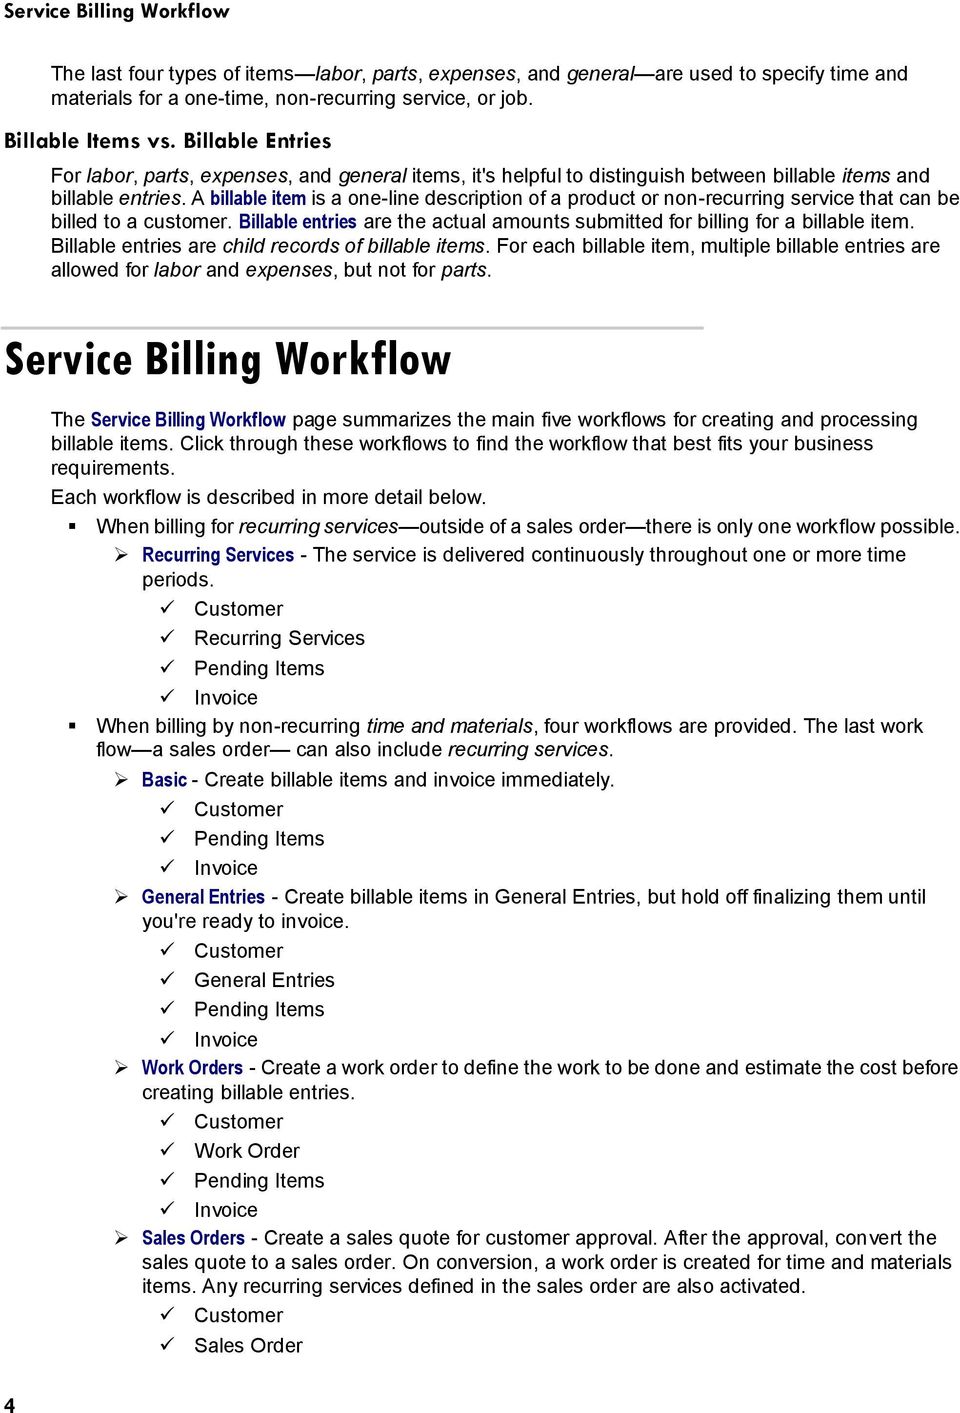 A billable item is a one-line description of a product or non-recurring service that can be billed to a customer. Billable entries are the actual amounts submitted for billing for a billable item.